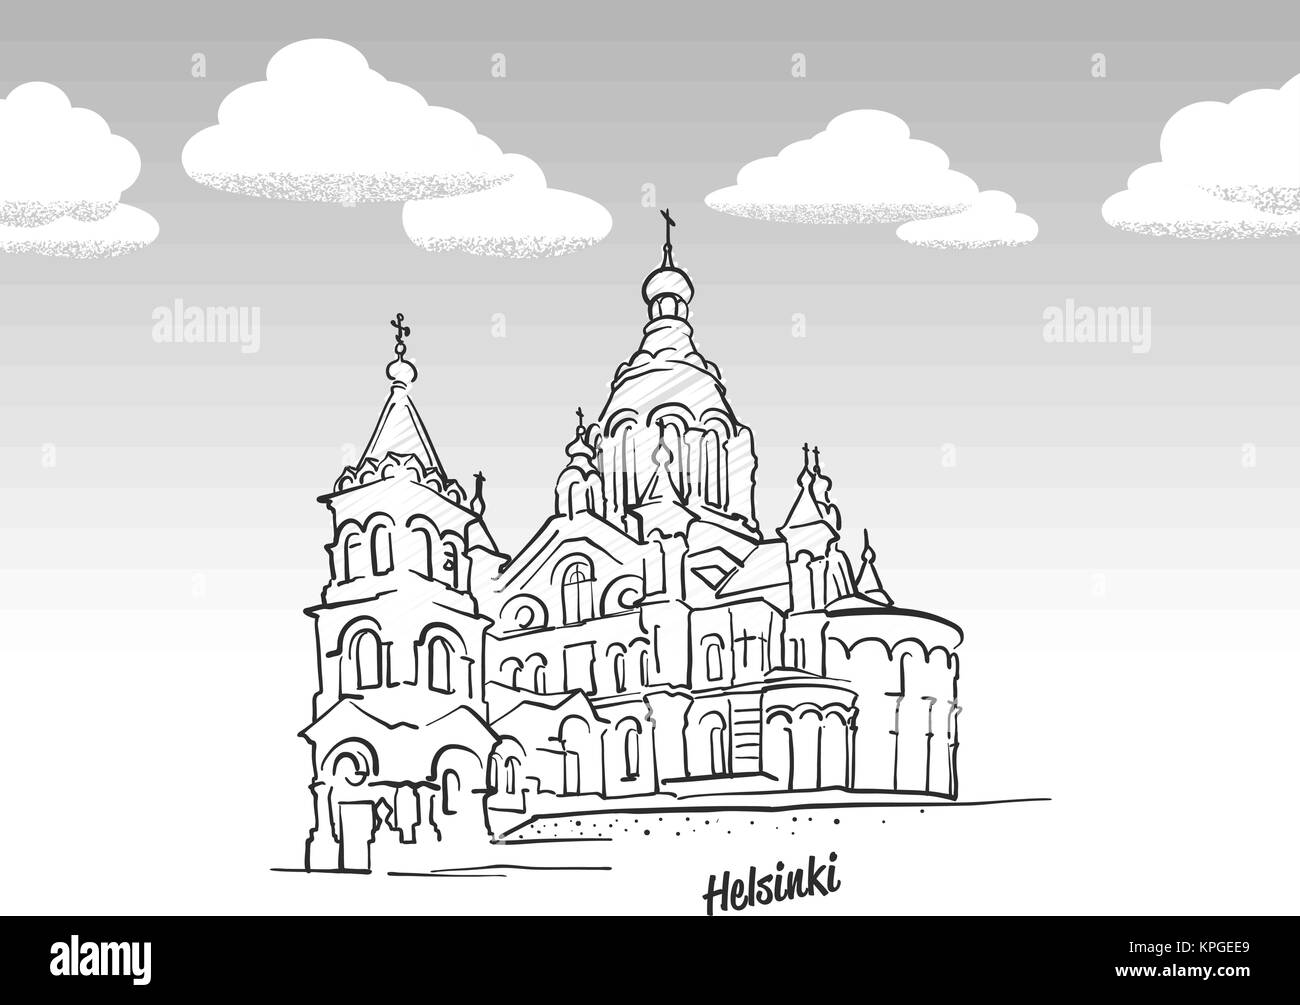 Helsinki, Finland famous landmark sketch. Lineart drawing by hand. Greeting card icon with title, vector illustration Stock Vector